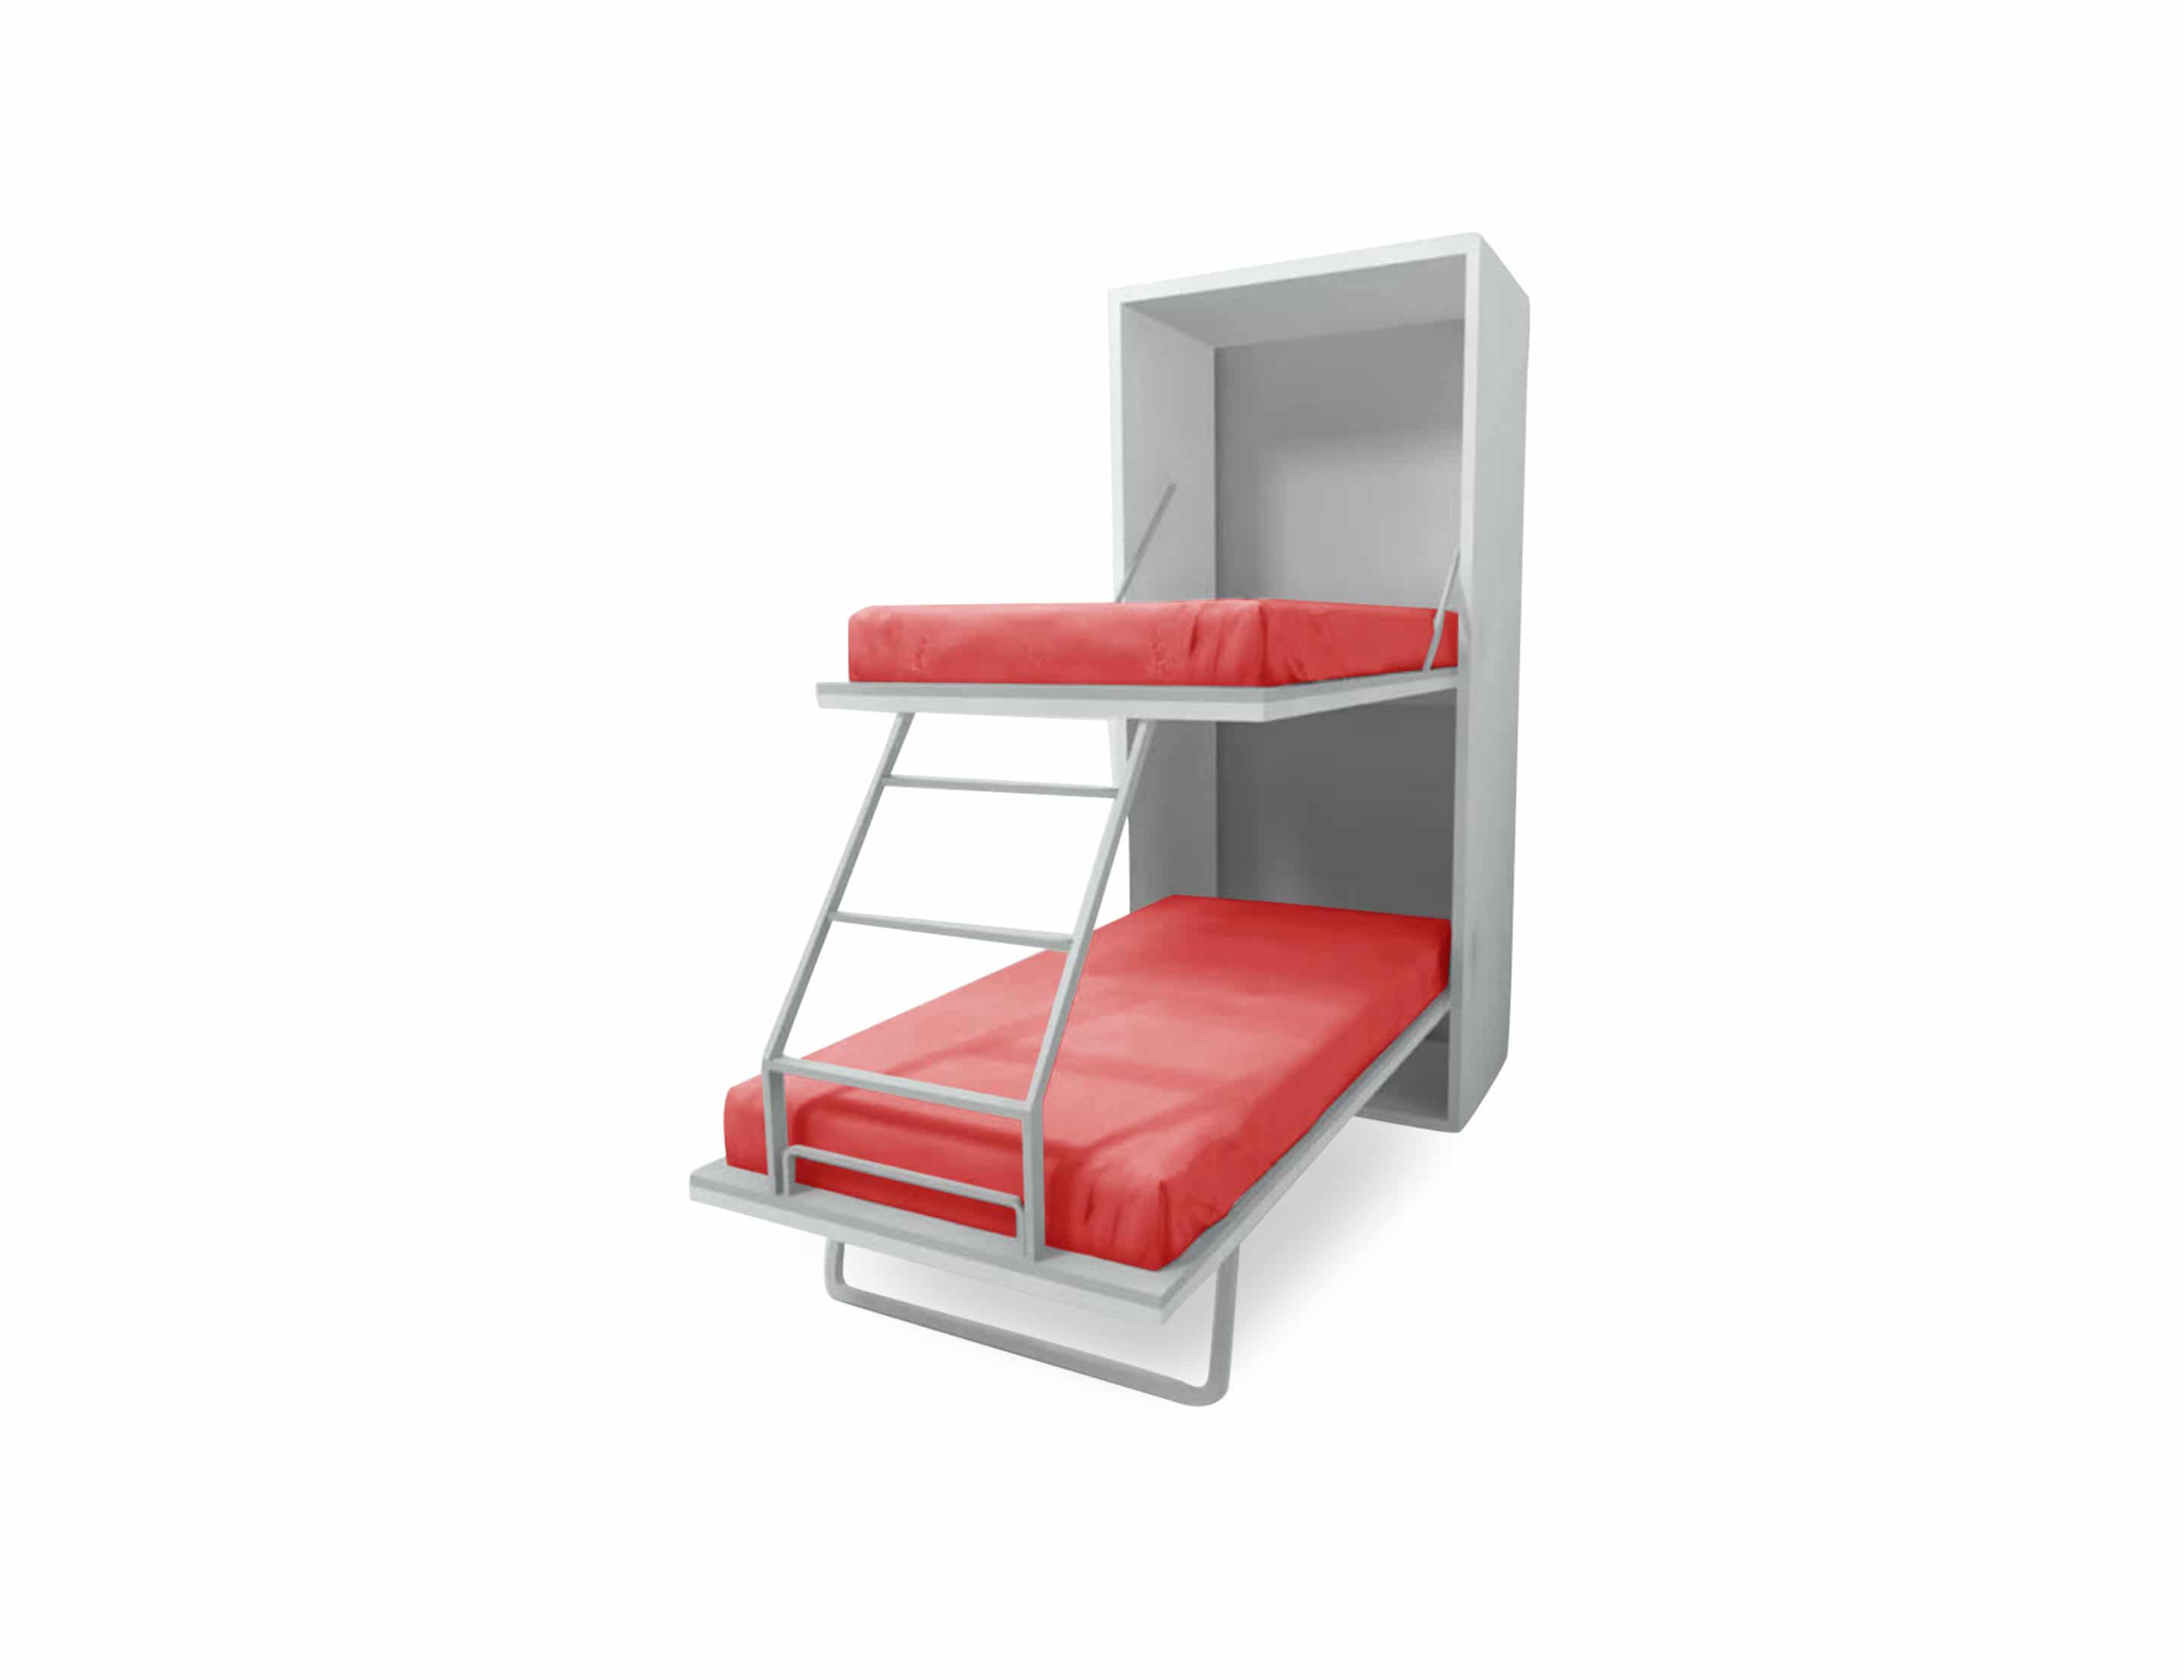 Vertical Murphy Bunk Beds, Bunk Bed With Tv Stand